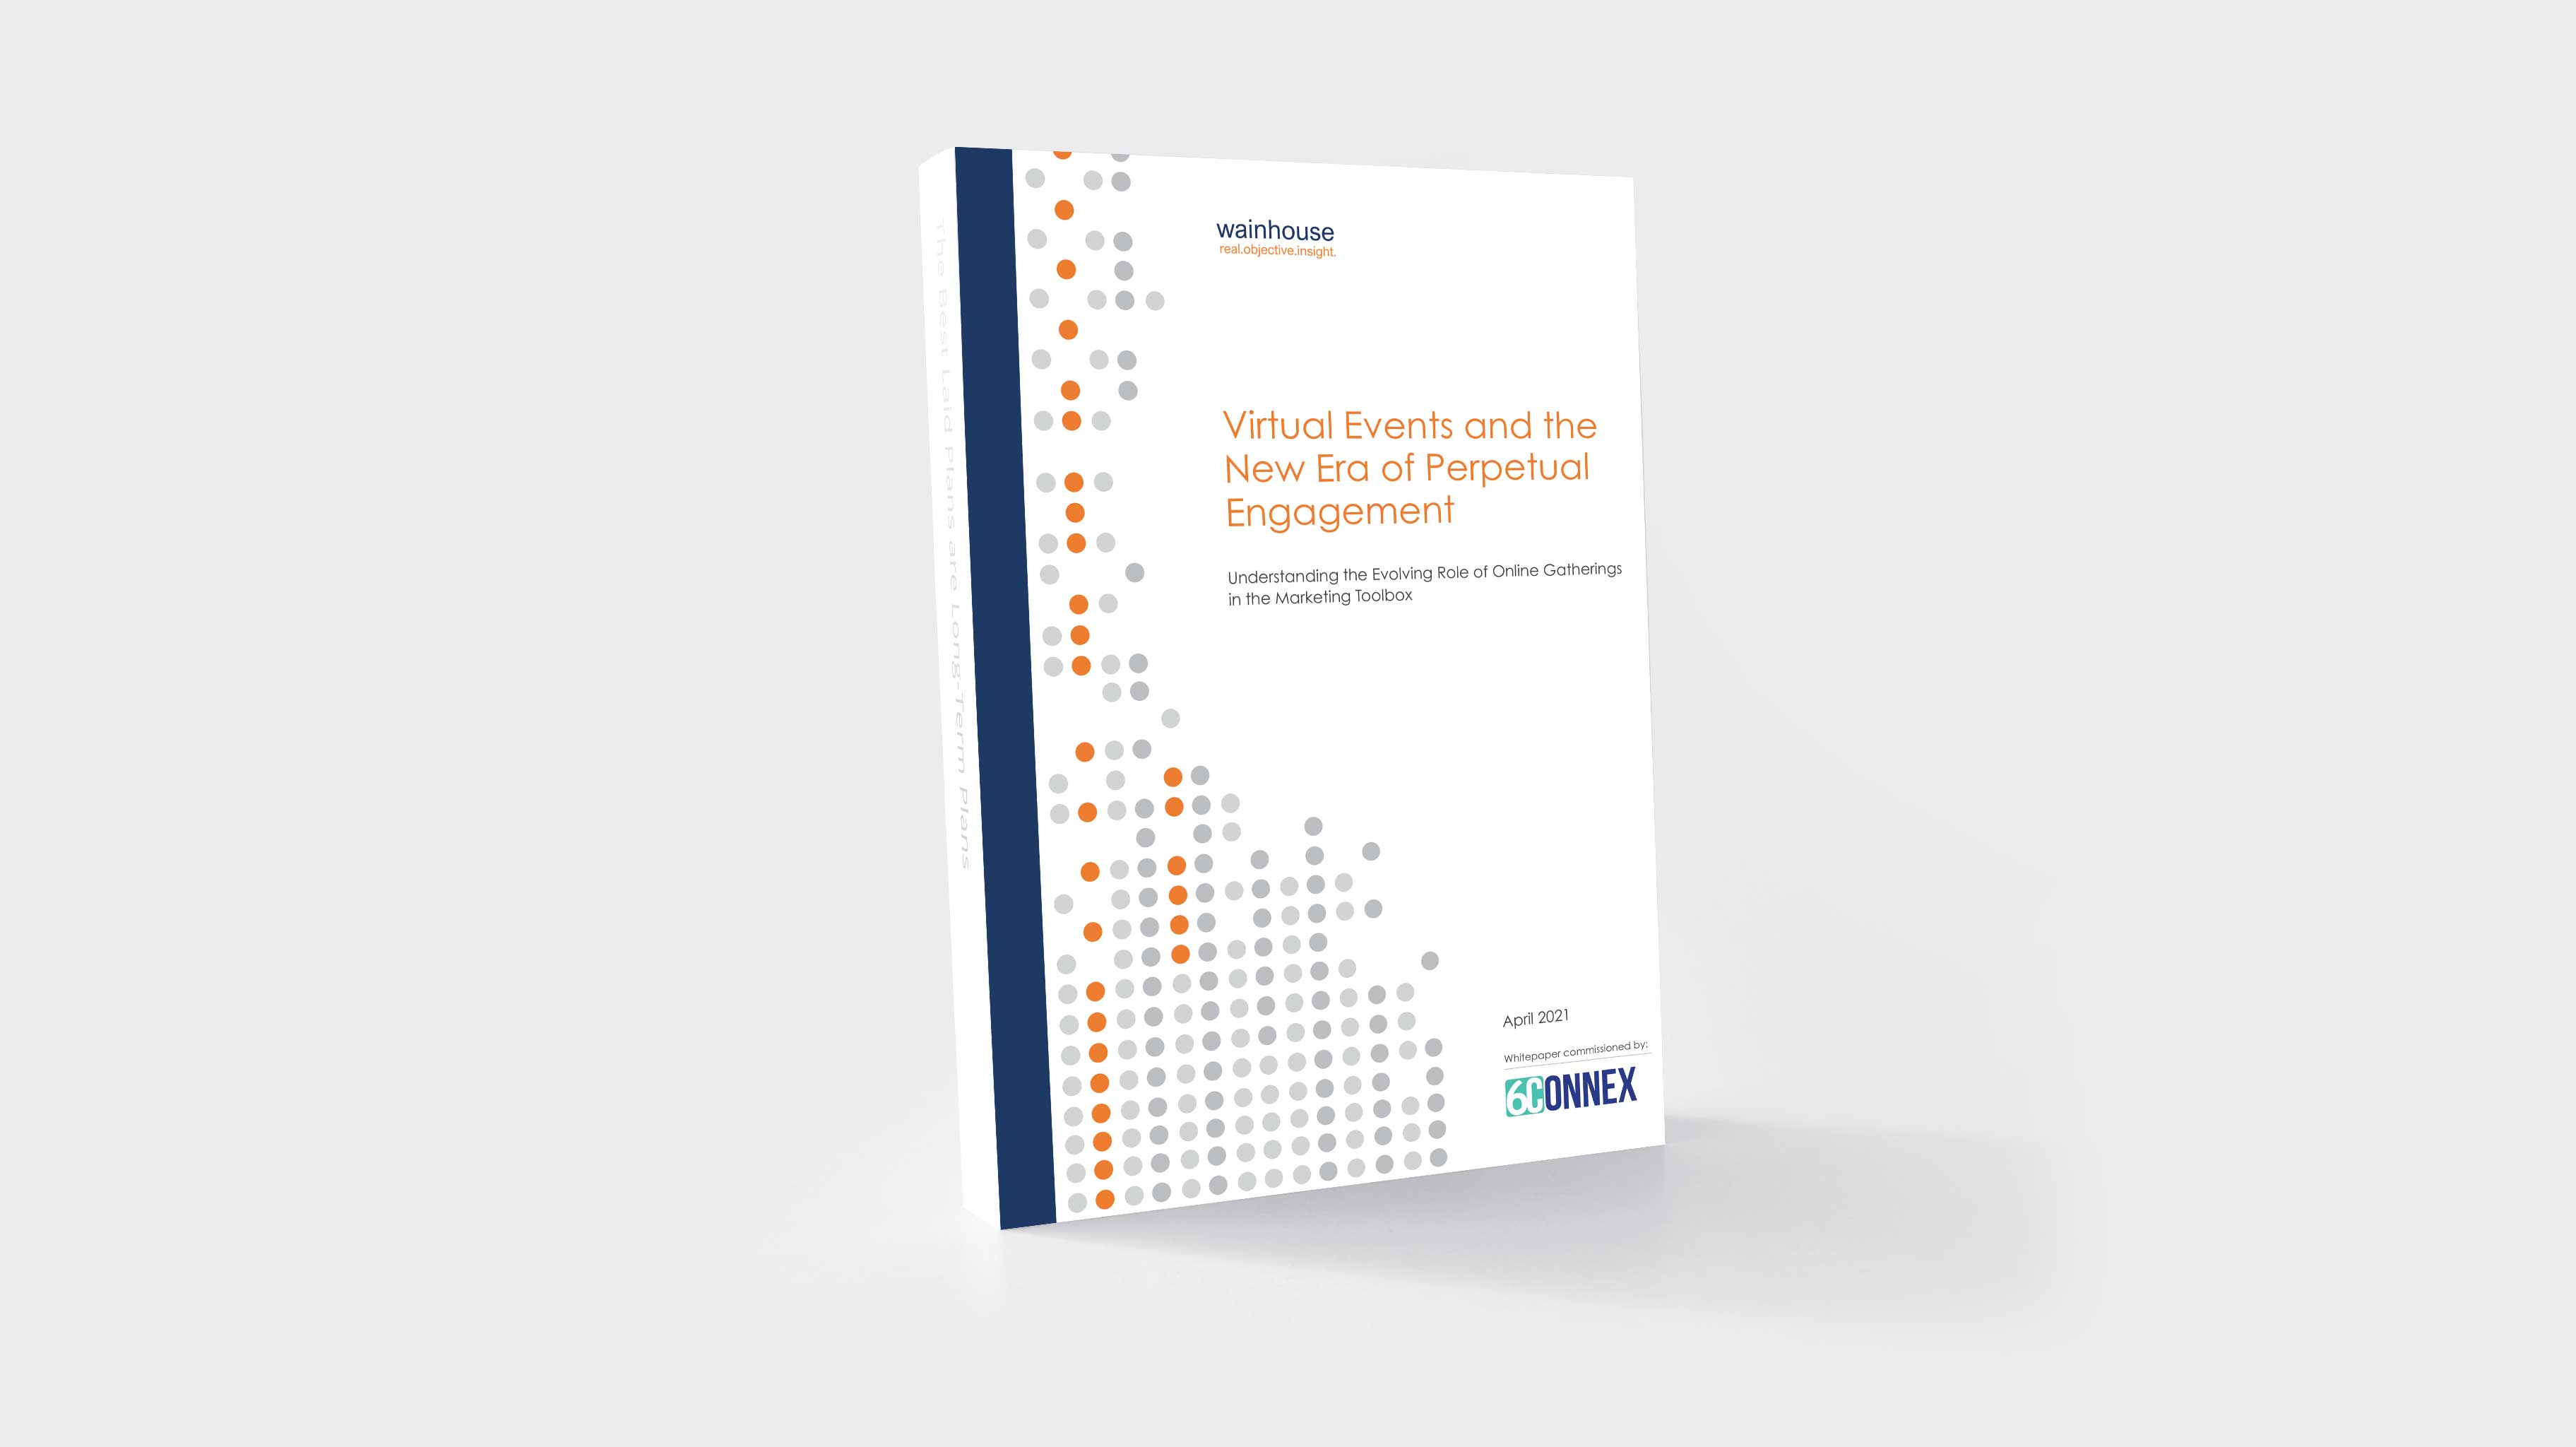 new era of perpetual engagement virtual event white paper research cover